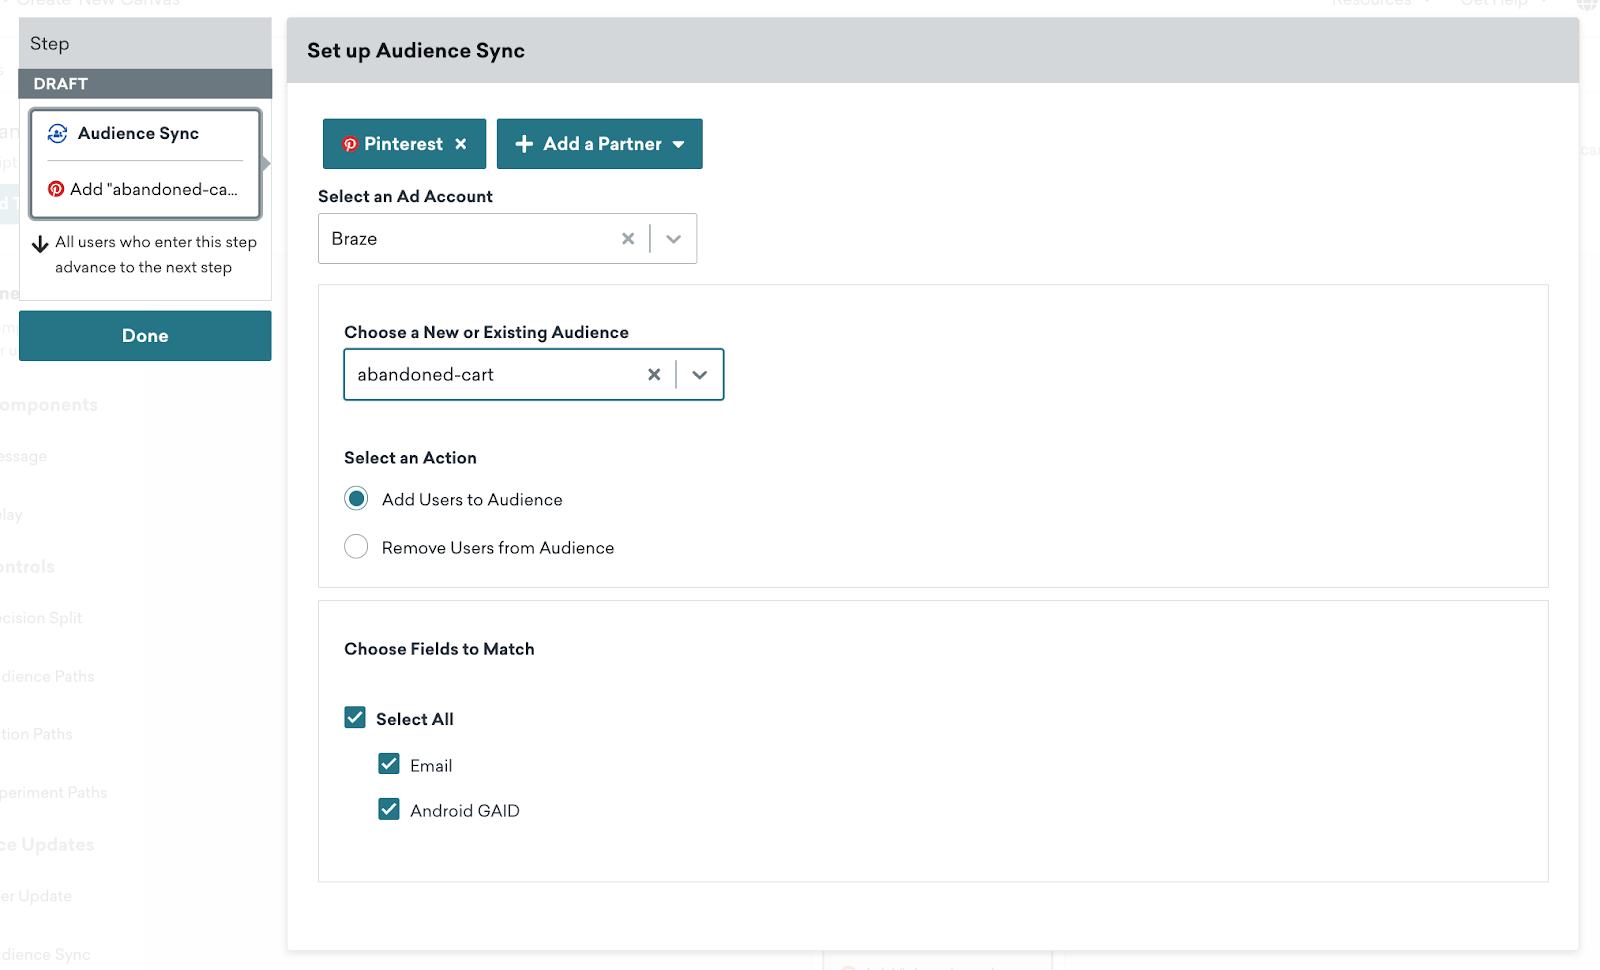 Expanded view of the Custom Audience Canvas step. Here, the desired Ad account and existing audience are selected.